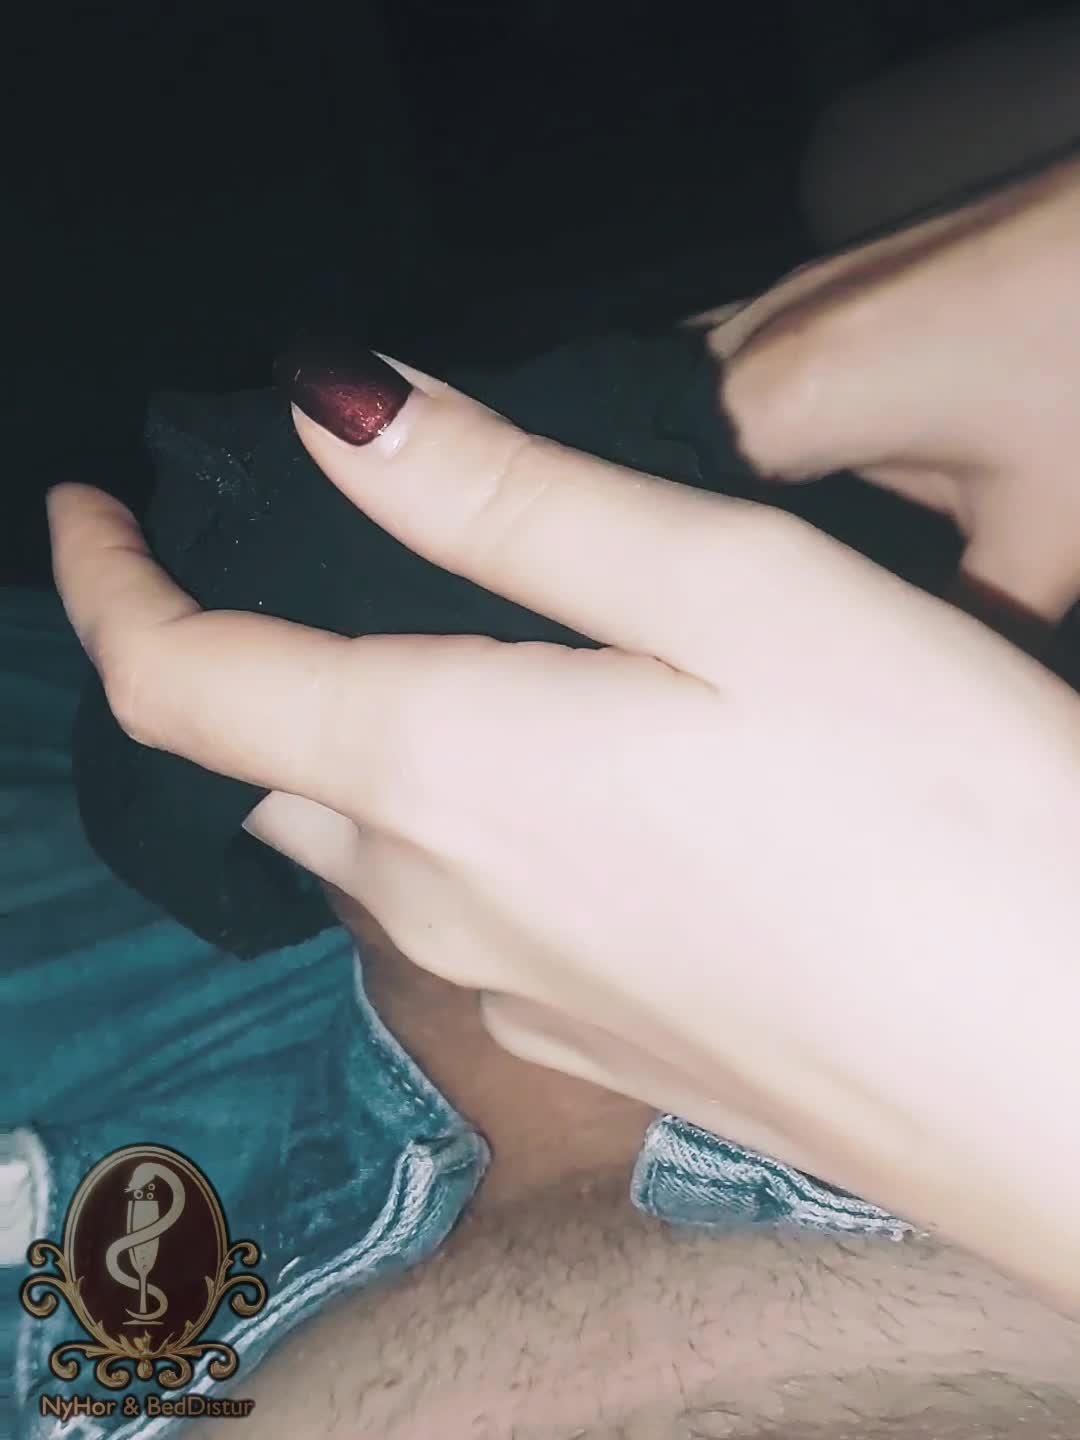 Watch the Video by nyHor&bedDistur with the username @nyHorBedDistur, who is a verified user, posted on August 28, 2022. The post is about the topic Handjob. and the text says 'Share for more!

Freshly worn and soaked for a whole day. Cum, pussy juice and urine. The smell was breathtaking and incredibly hot. There is no better way to get a handjob'